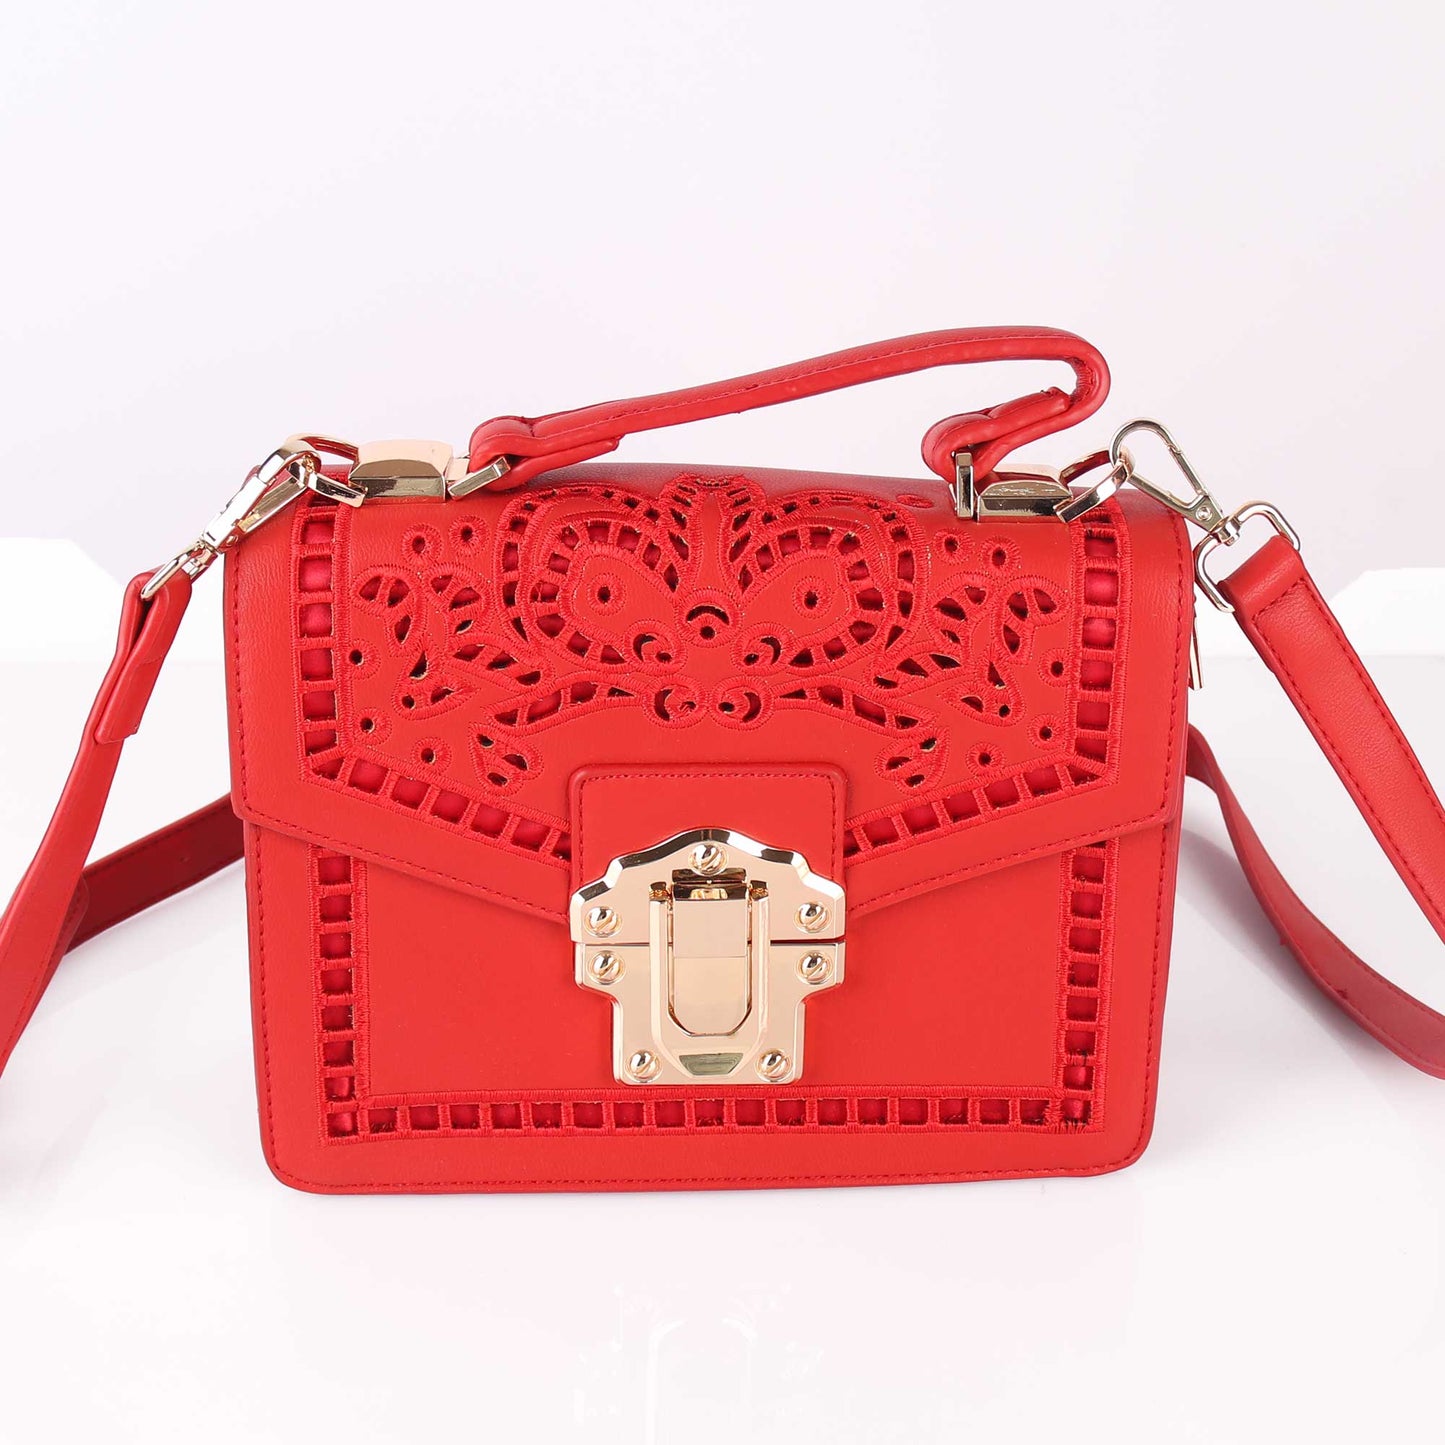 The Punched Sling Bag in Red